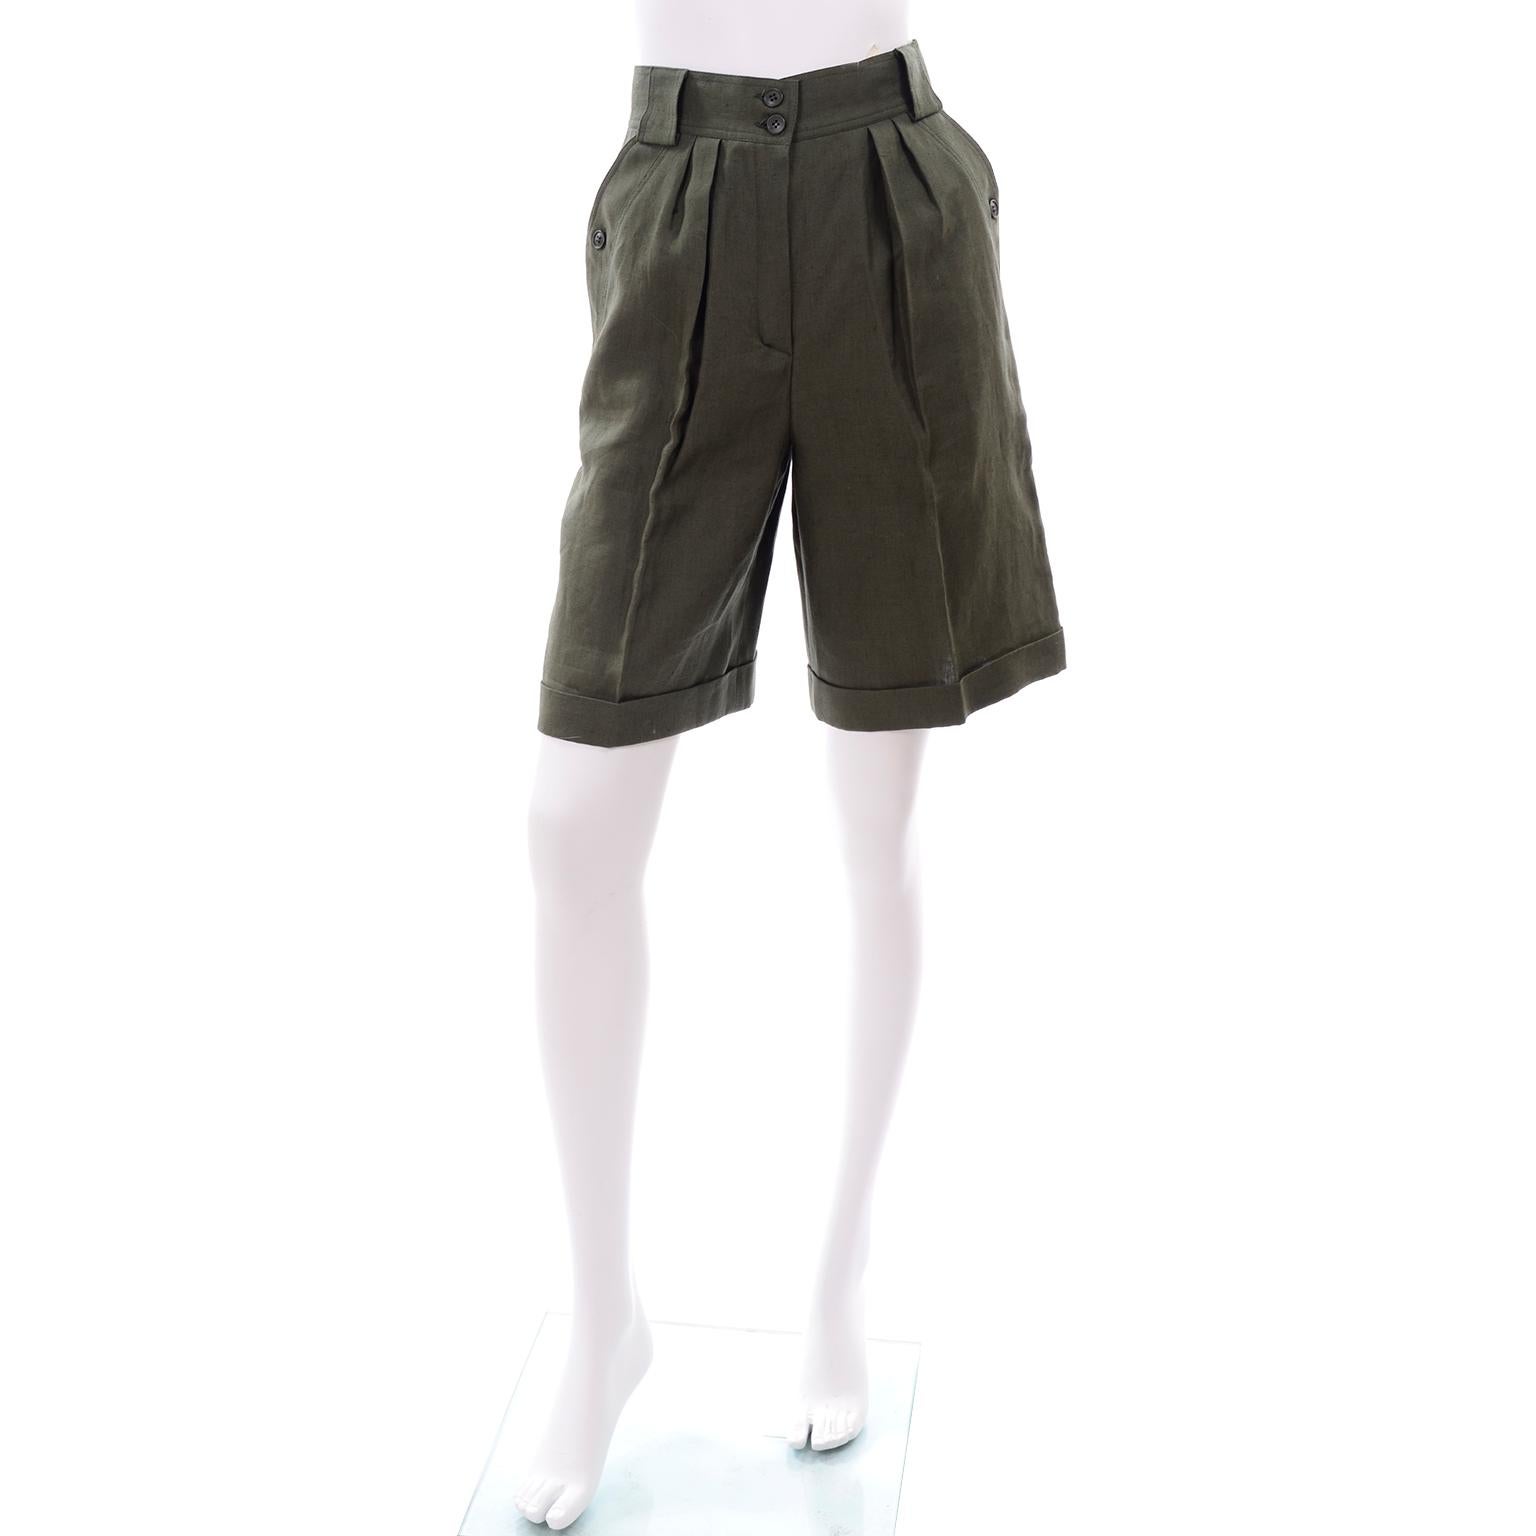 These vintage Escada high waisted vintage shorts are in an army green linen and were designed by Margaretha Ley in the 1980's. These high waisted, pleated shorts have button flap pockets at the hips and on the back.  The shorts are unlined, cuffed